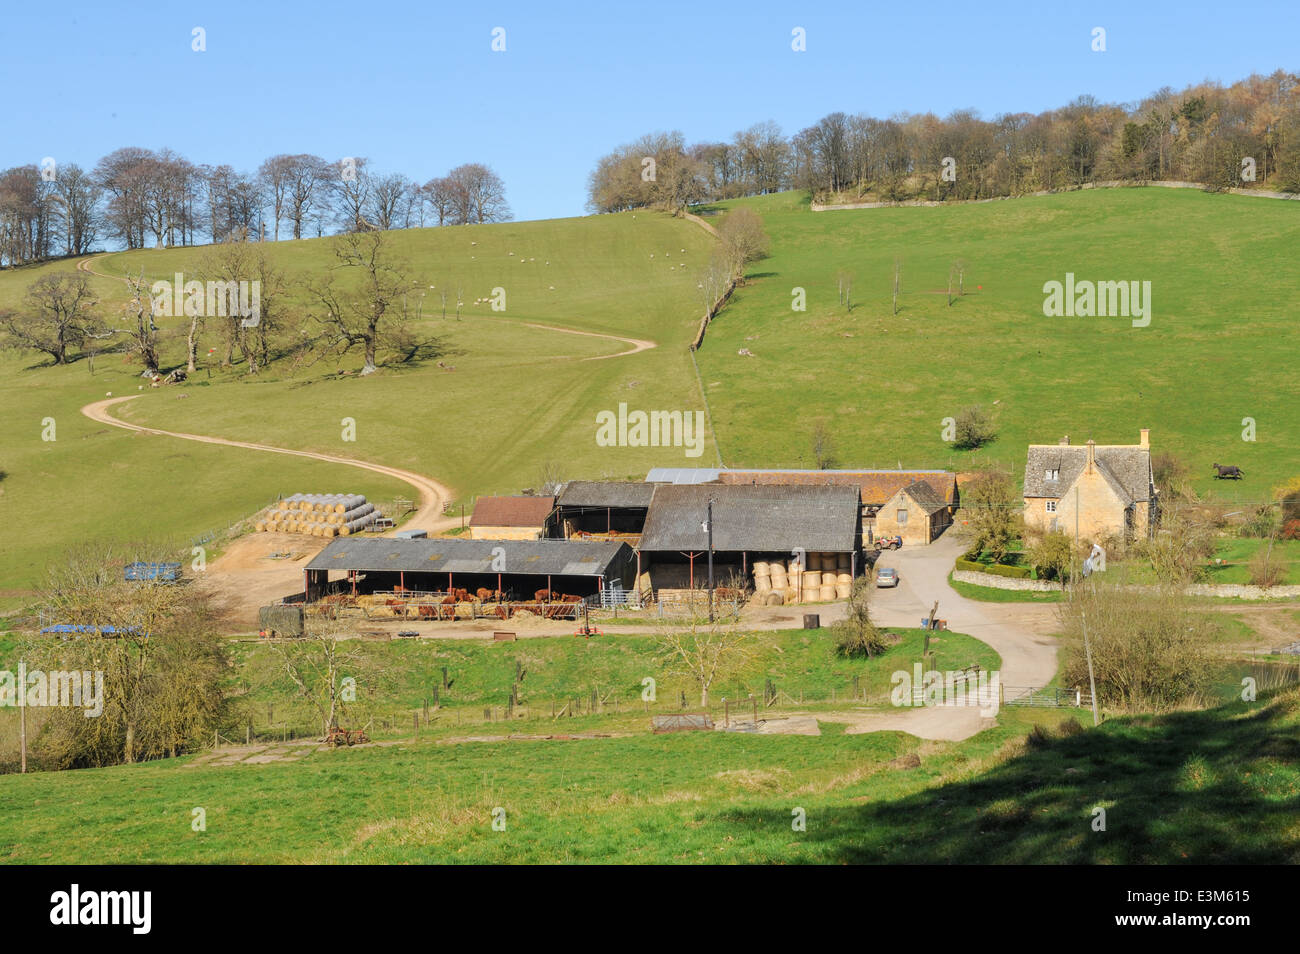 Traditional Cotswold Farm on the outskirts of Stanton in the Cotswolds, Gloucestershire, England, UK Stock Photo